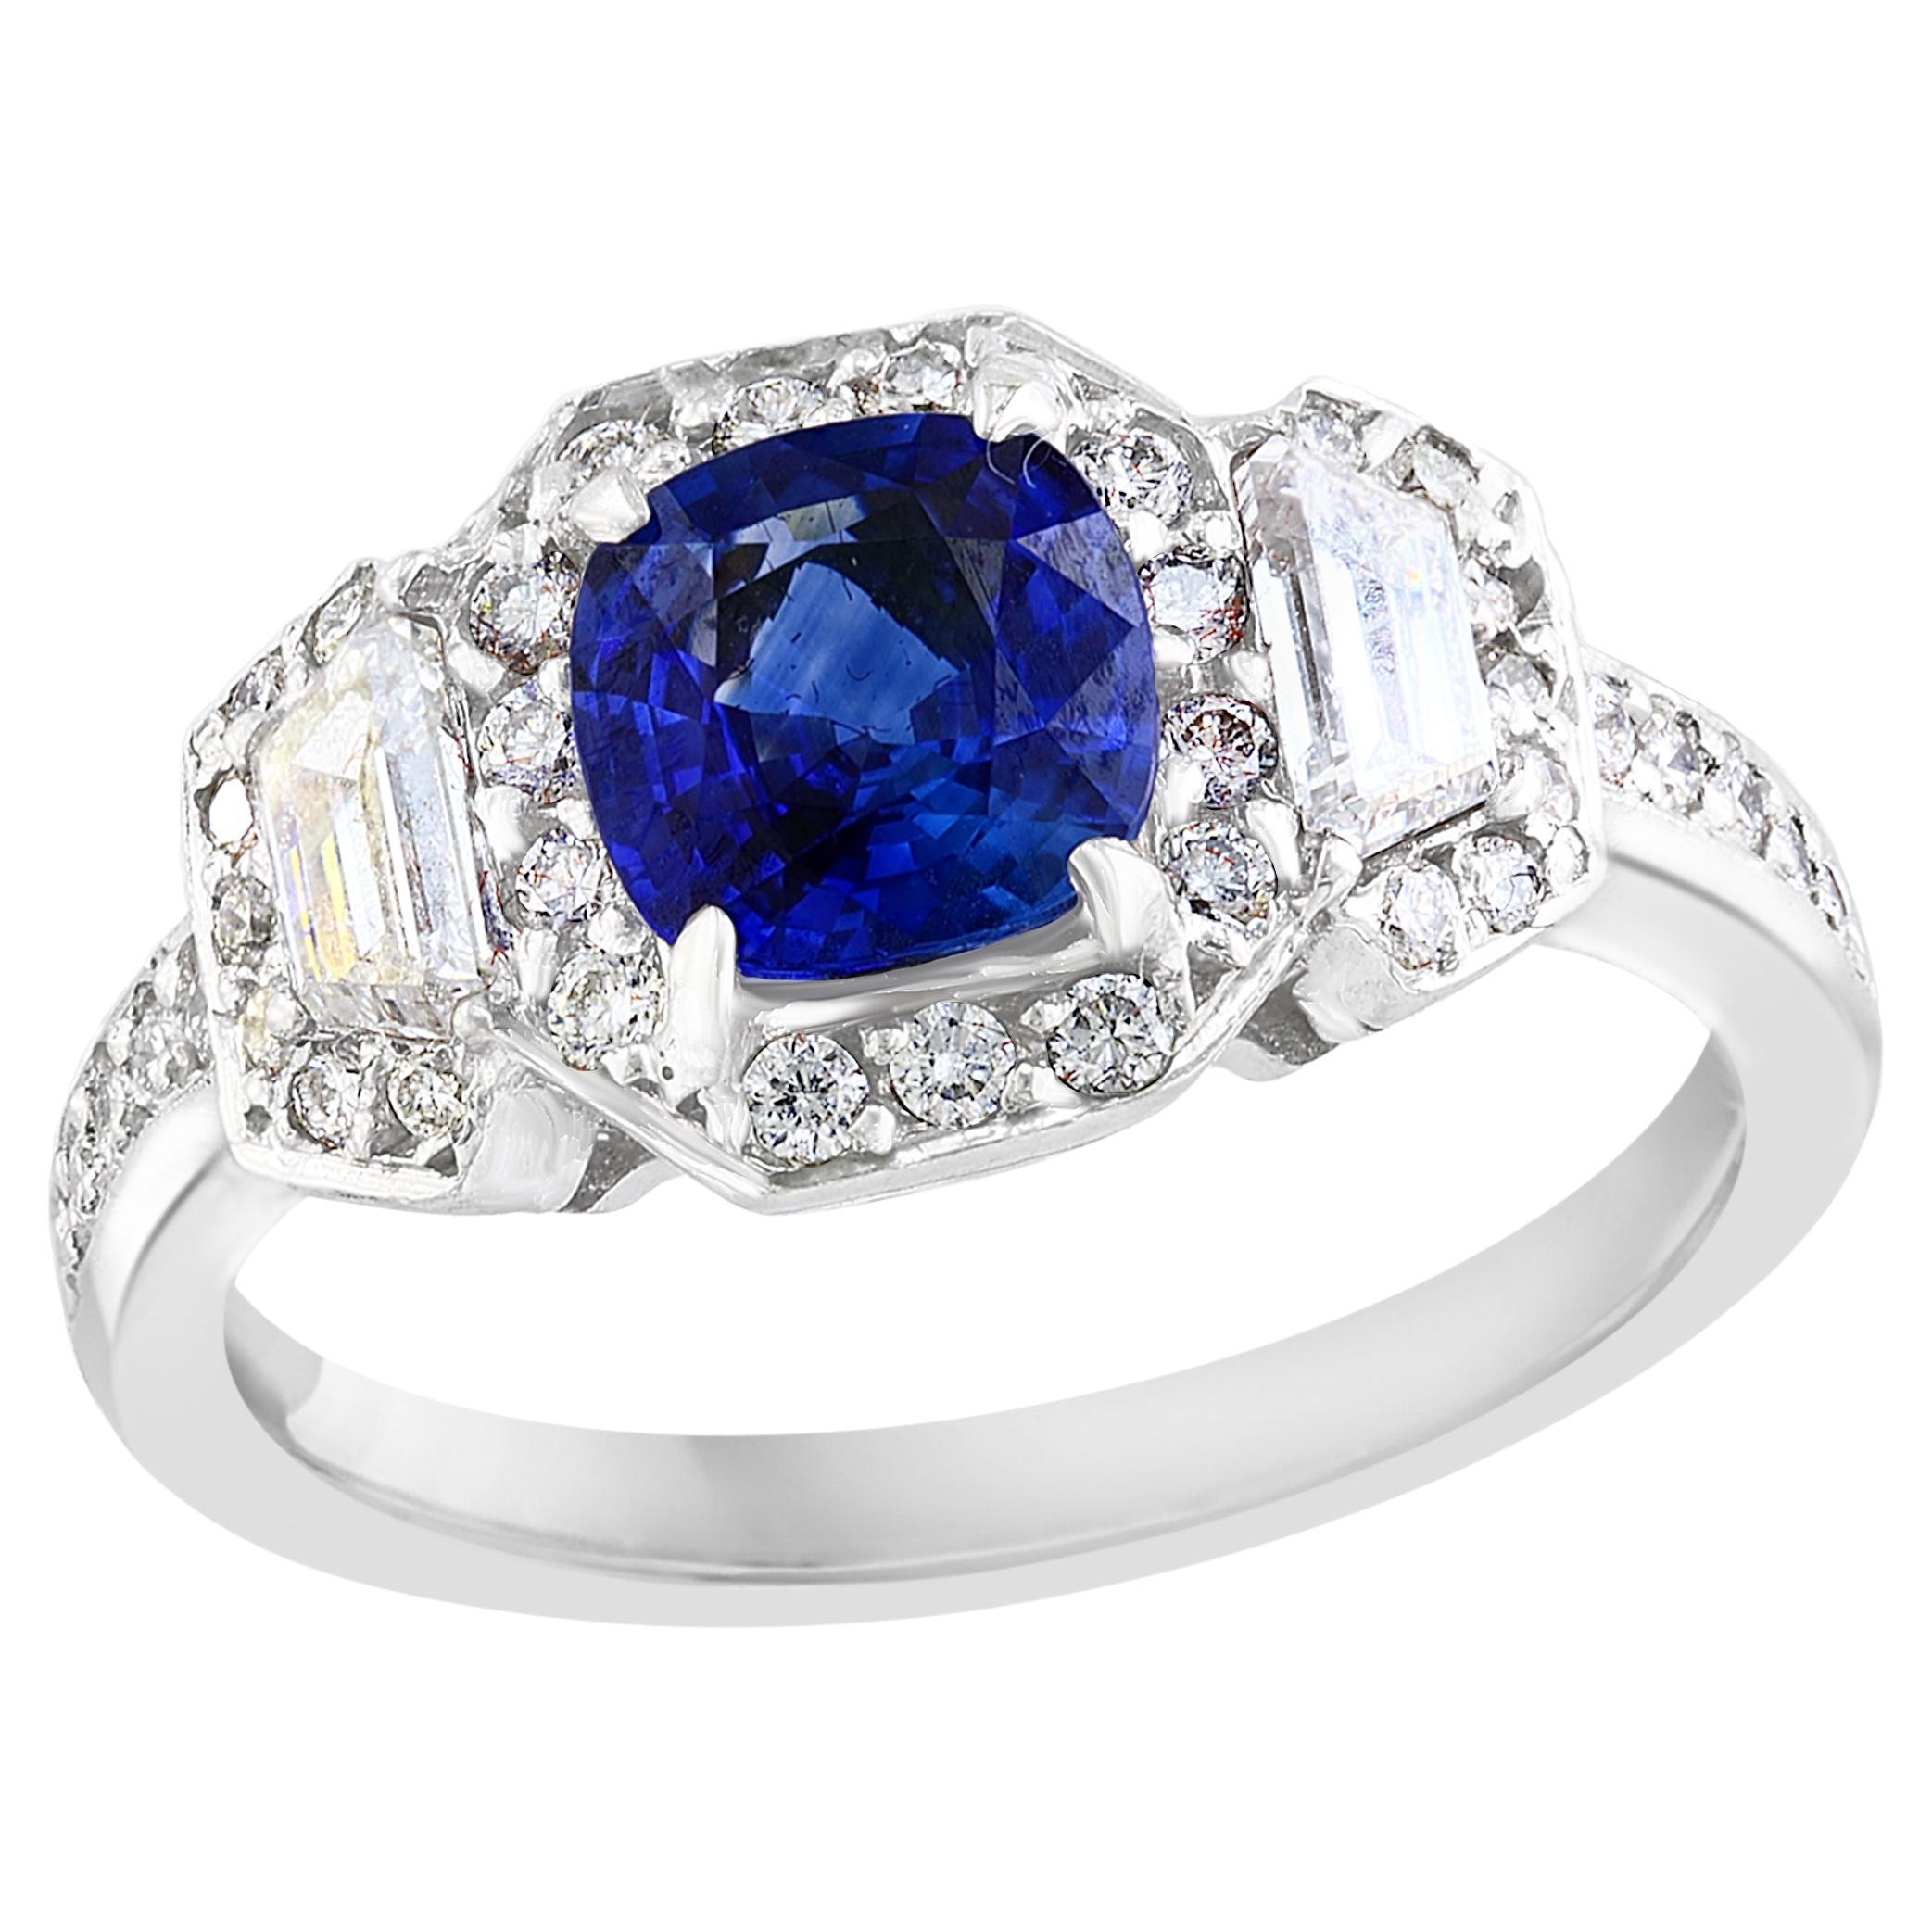 1.02 Carat Cushion Cut Sapphire and Diamond Three-Stone Halo Ring in Platinum For Sale